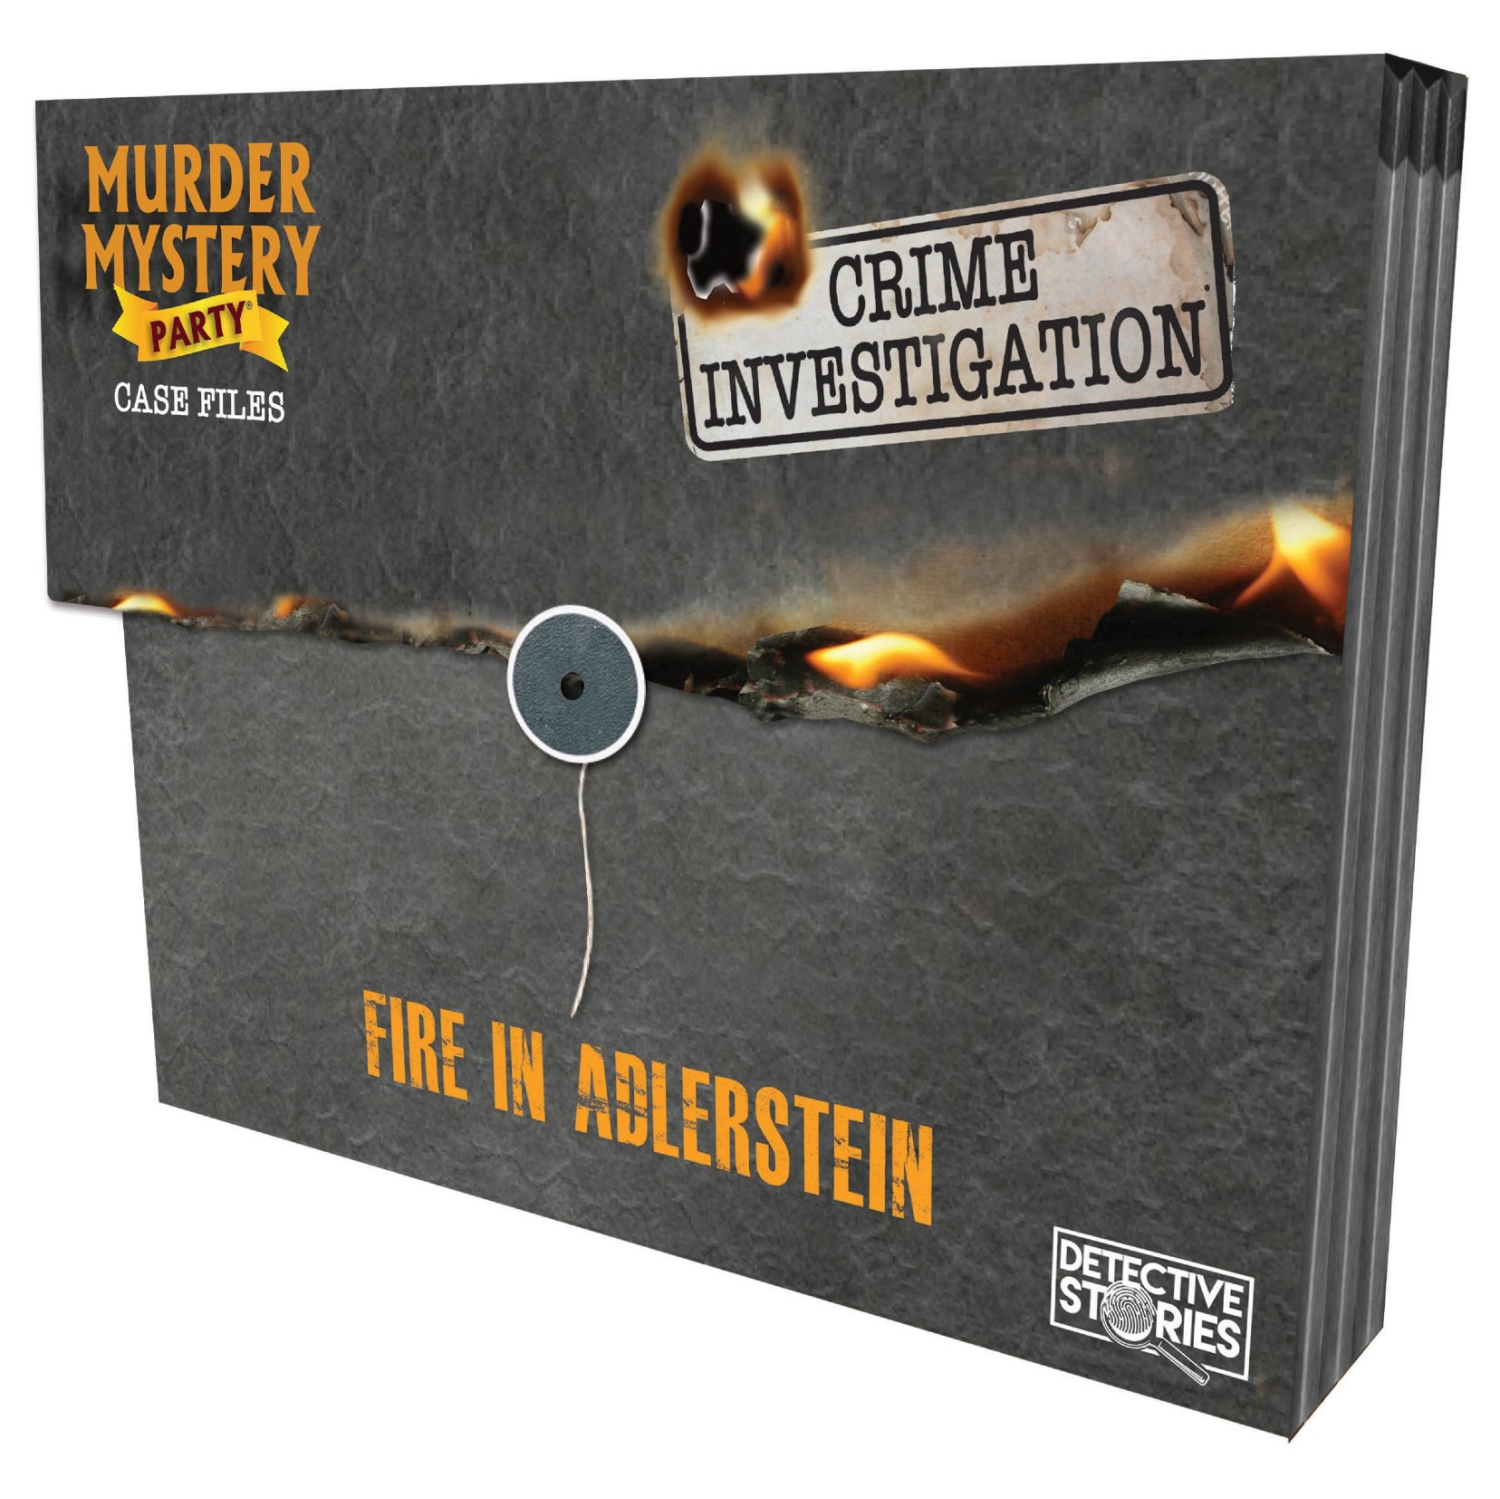 Murder Mystery Party: Case Files - Fire in Adlerstein 1+ players, ages 14+